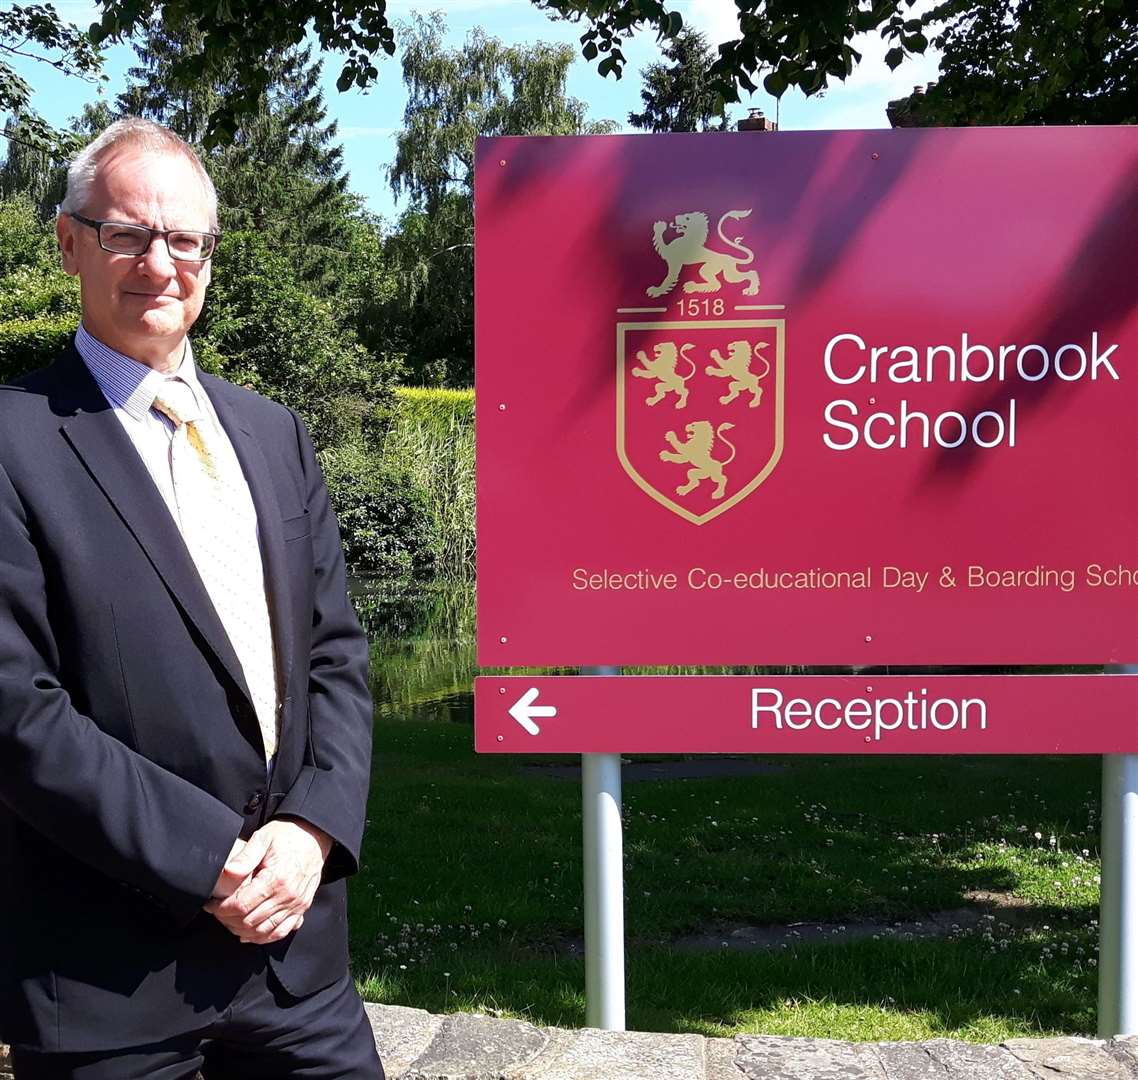 Cranbrook School headmaster Dr John Weeds issued tributes to the former pupils